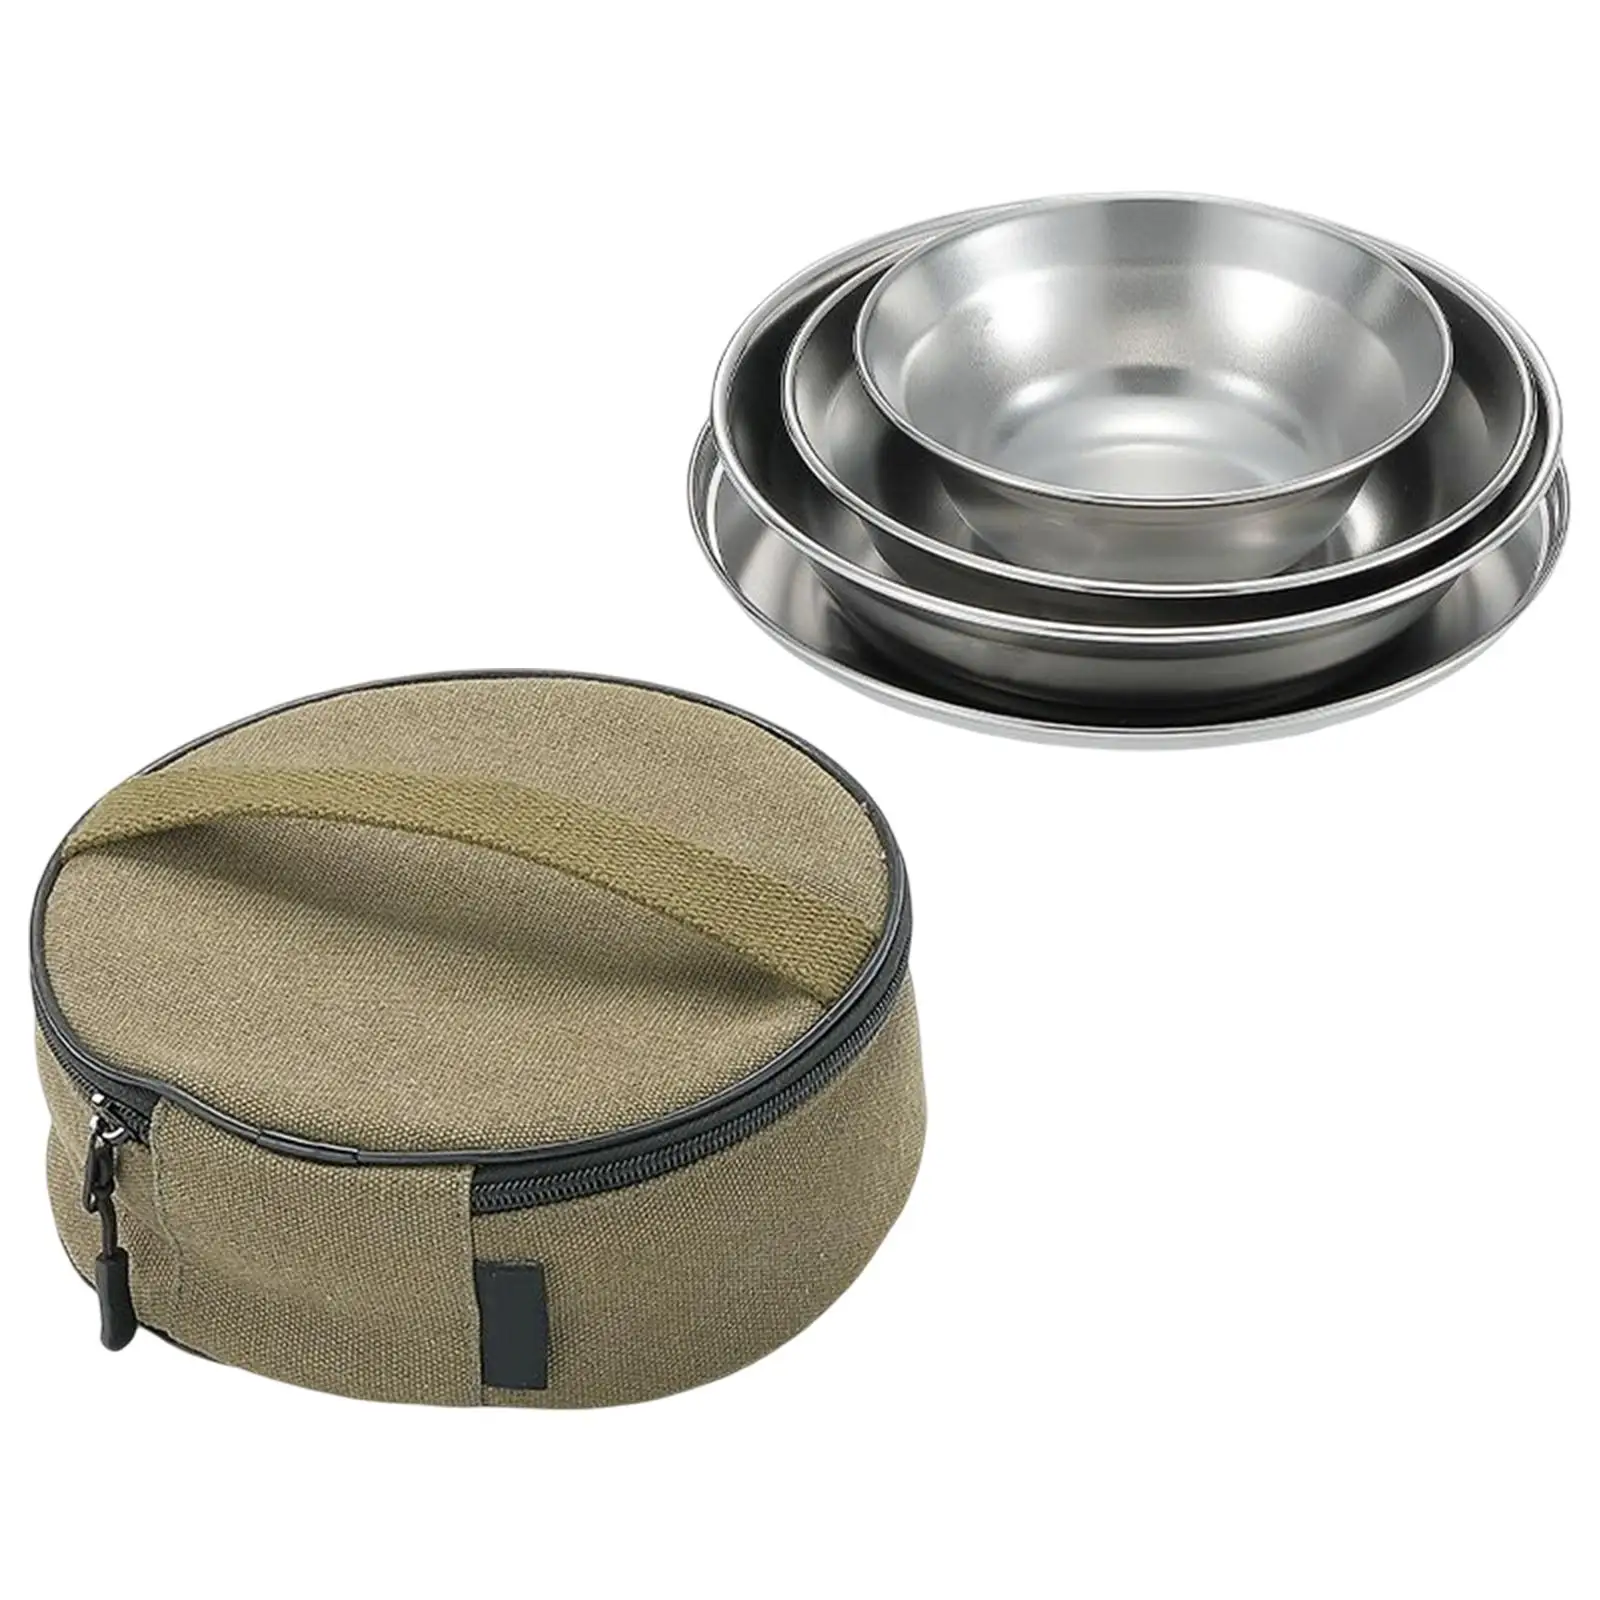 Portable Camping Tableware with Storage Bag Cookware for Trekking Cooking